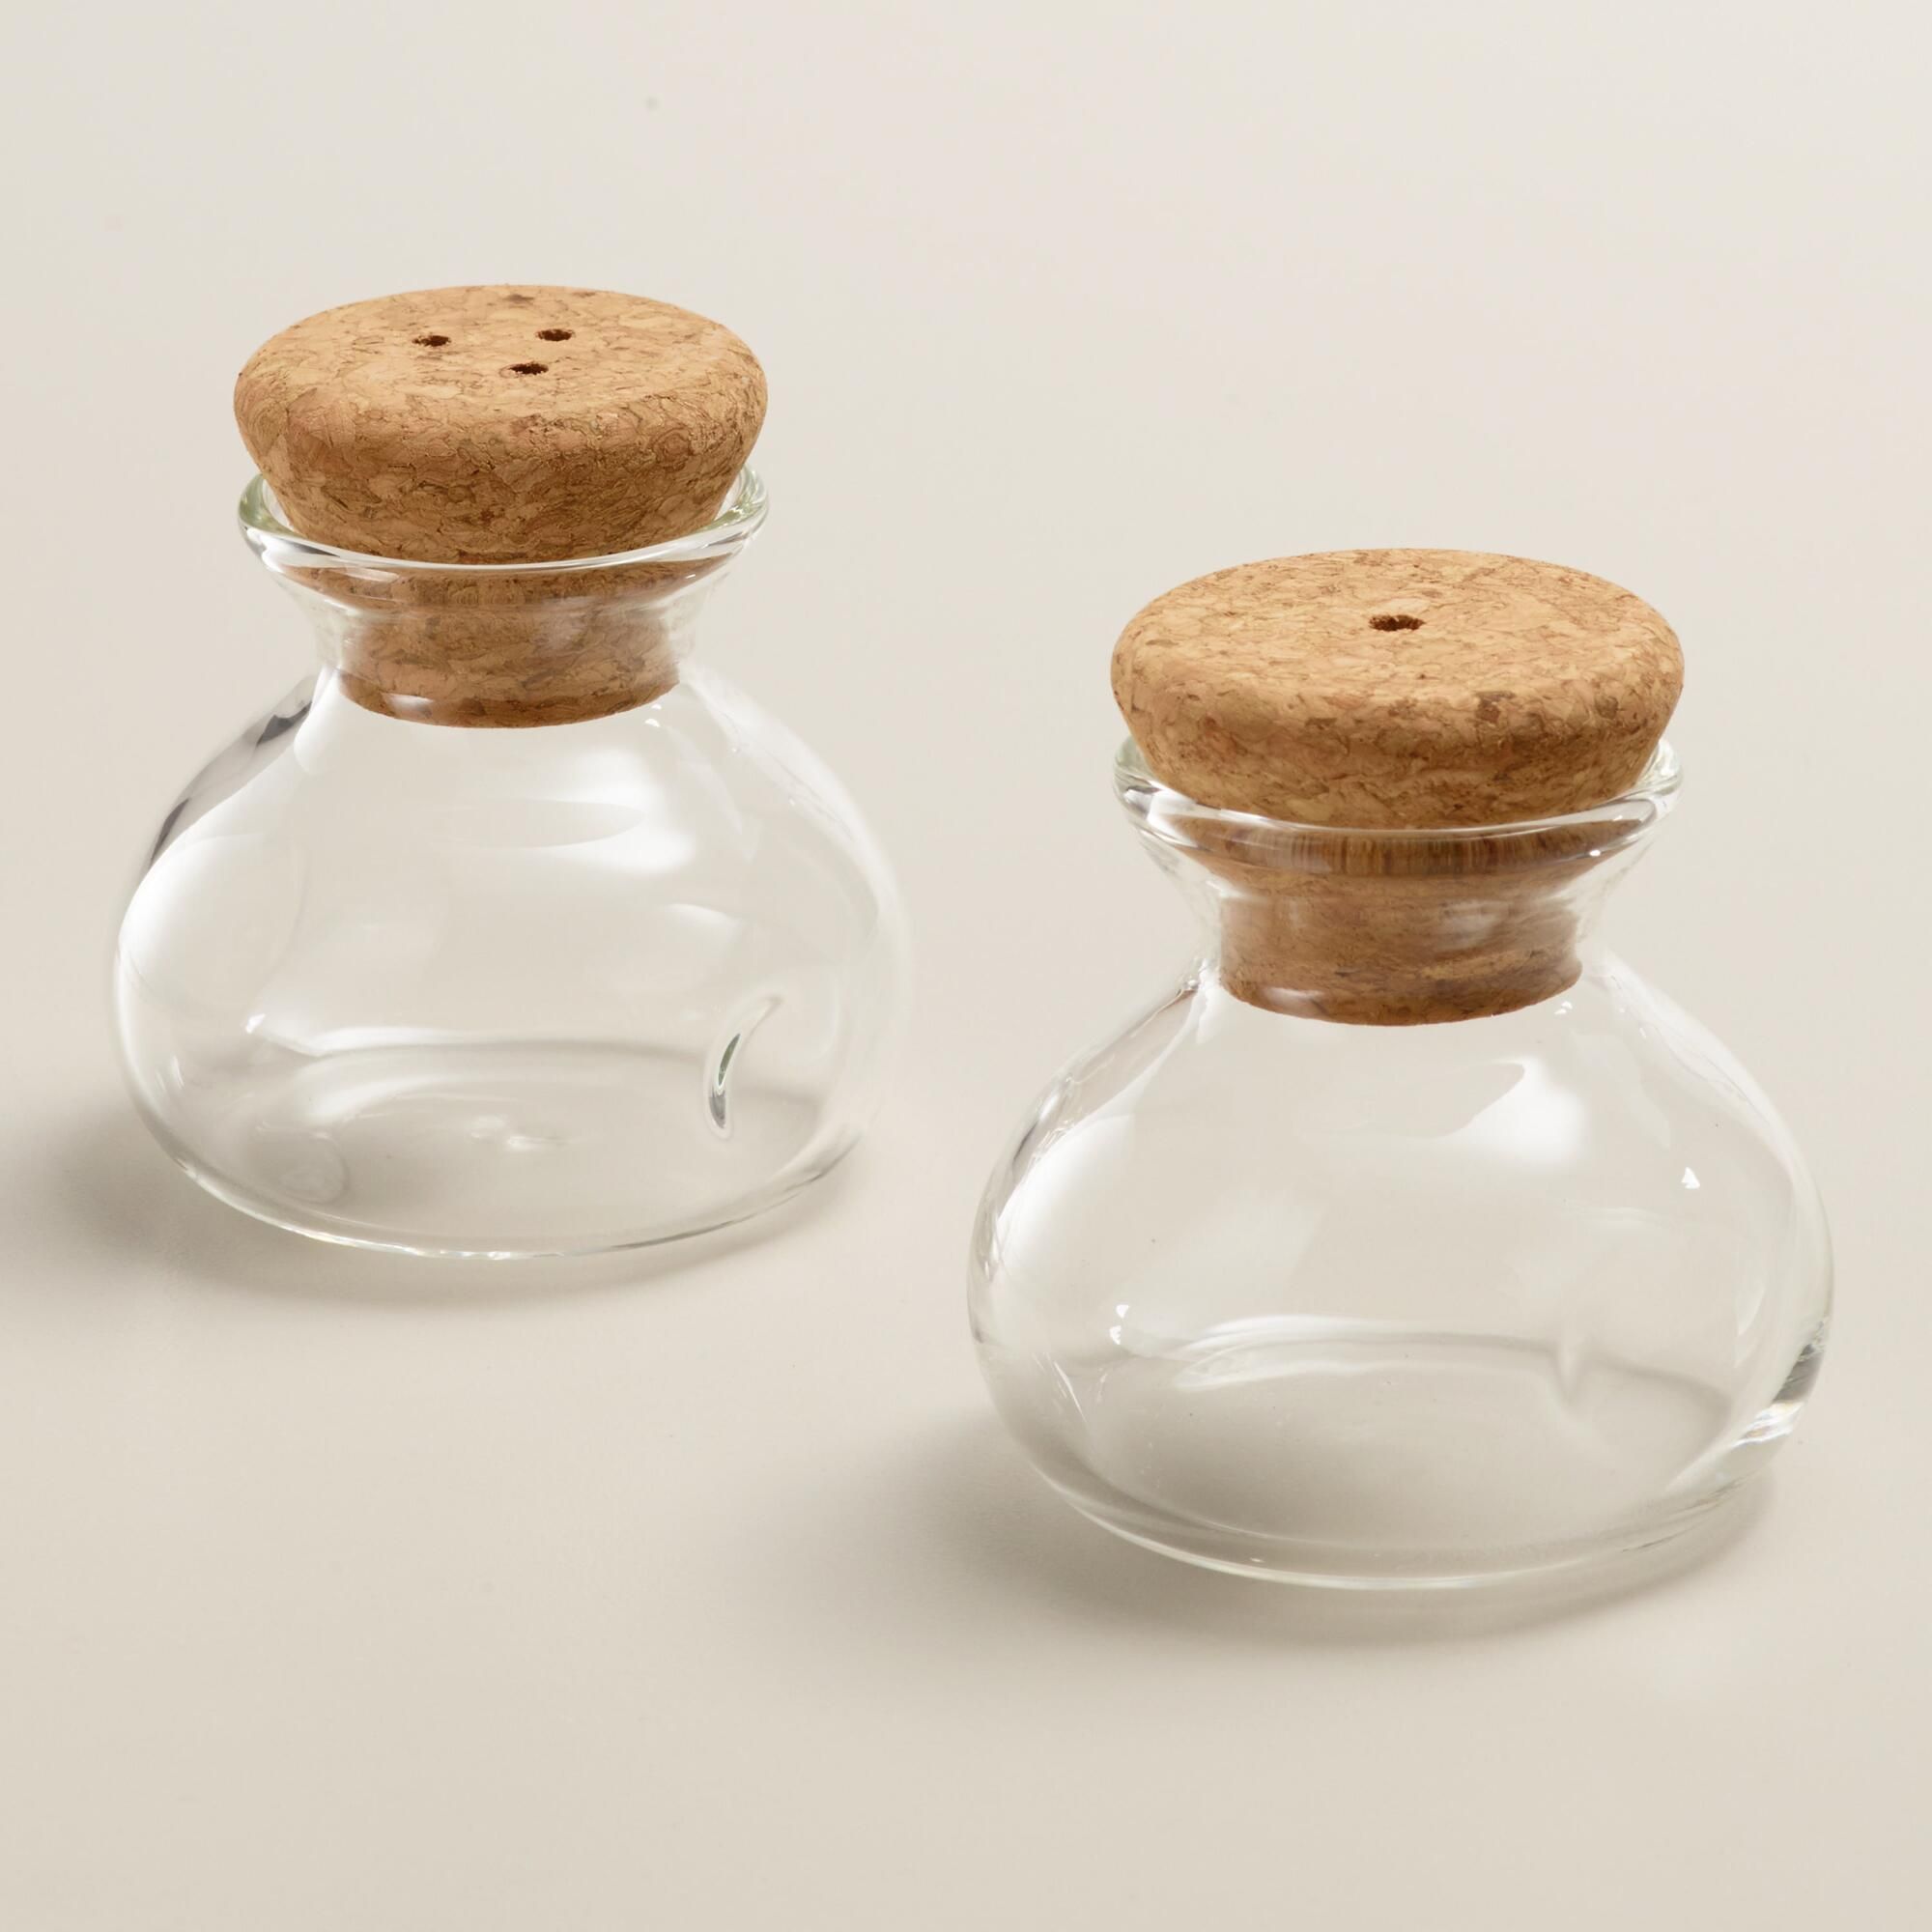 How To Find Cork Stoppers For Salt And Pepper Shakers